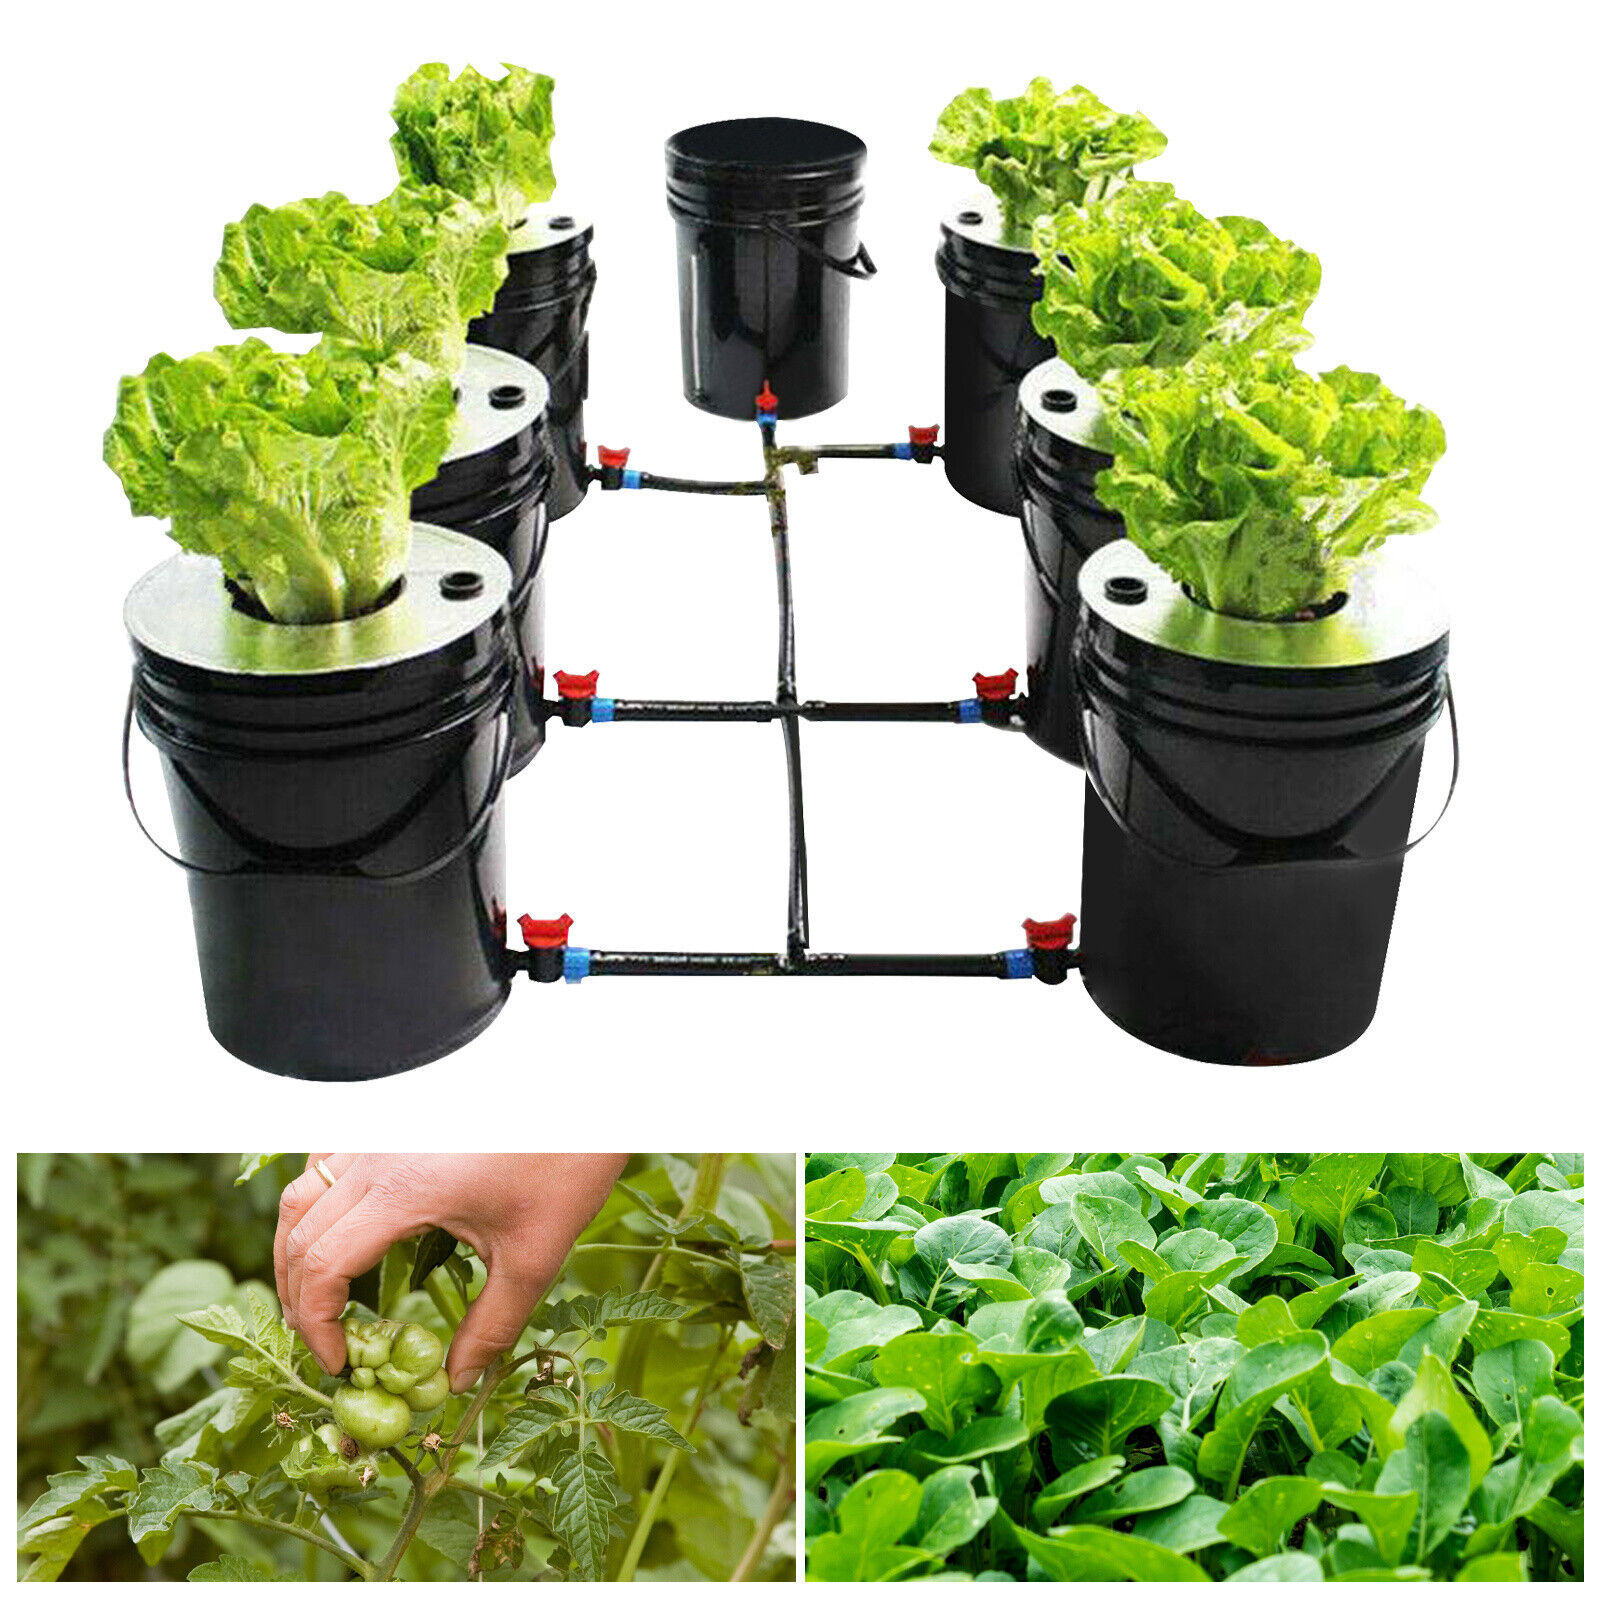 (1+6) x 5 Gal. Bucket DWC Hydroponic Soilless Cultivation for Indoor&Outdoor